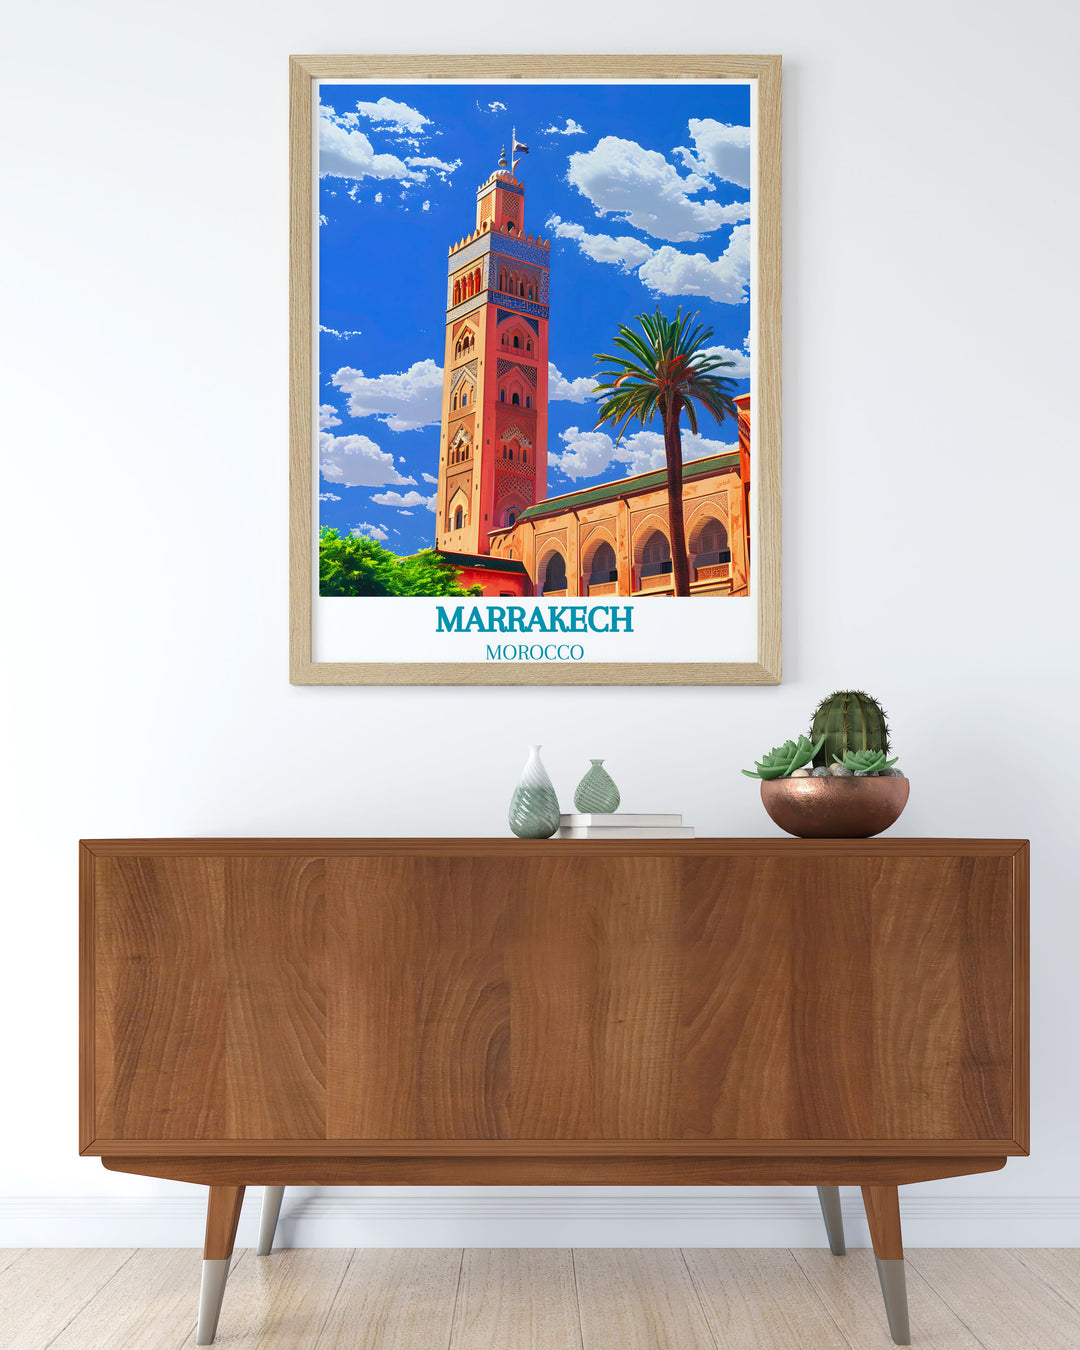 This art print highlights the picturesque scenery of Marrakech, from its historic mosques to its lively markets, making it a perfect addition to your cultural art collection.